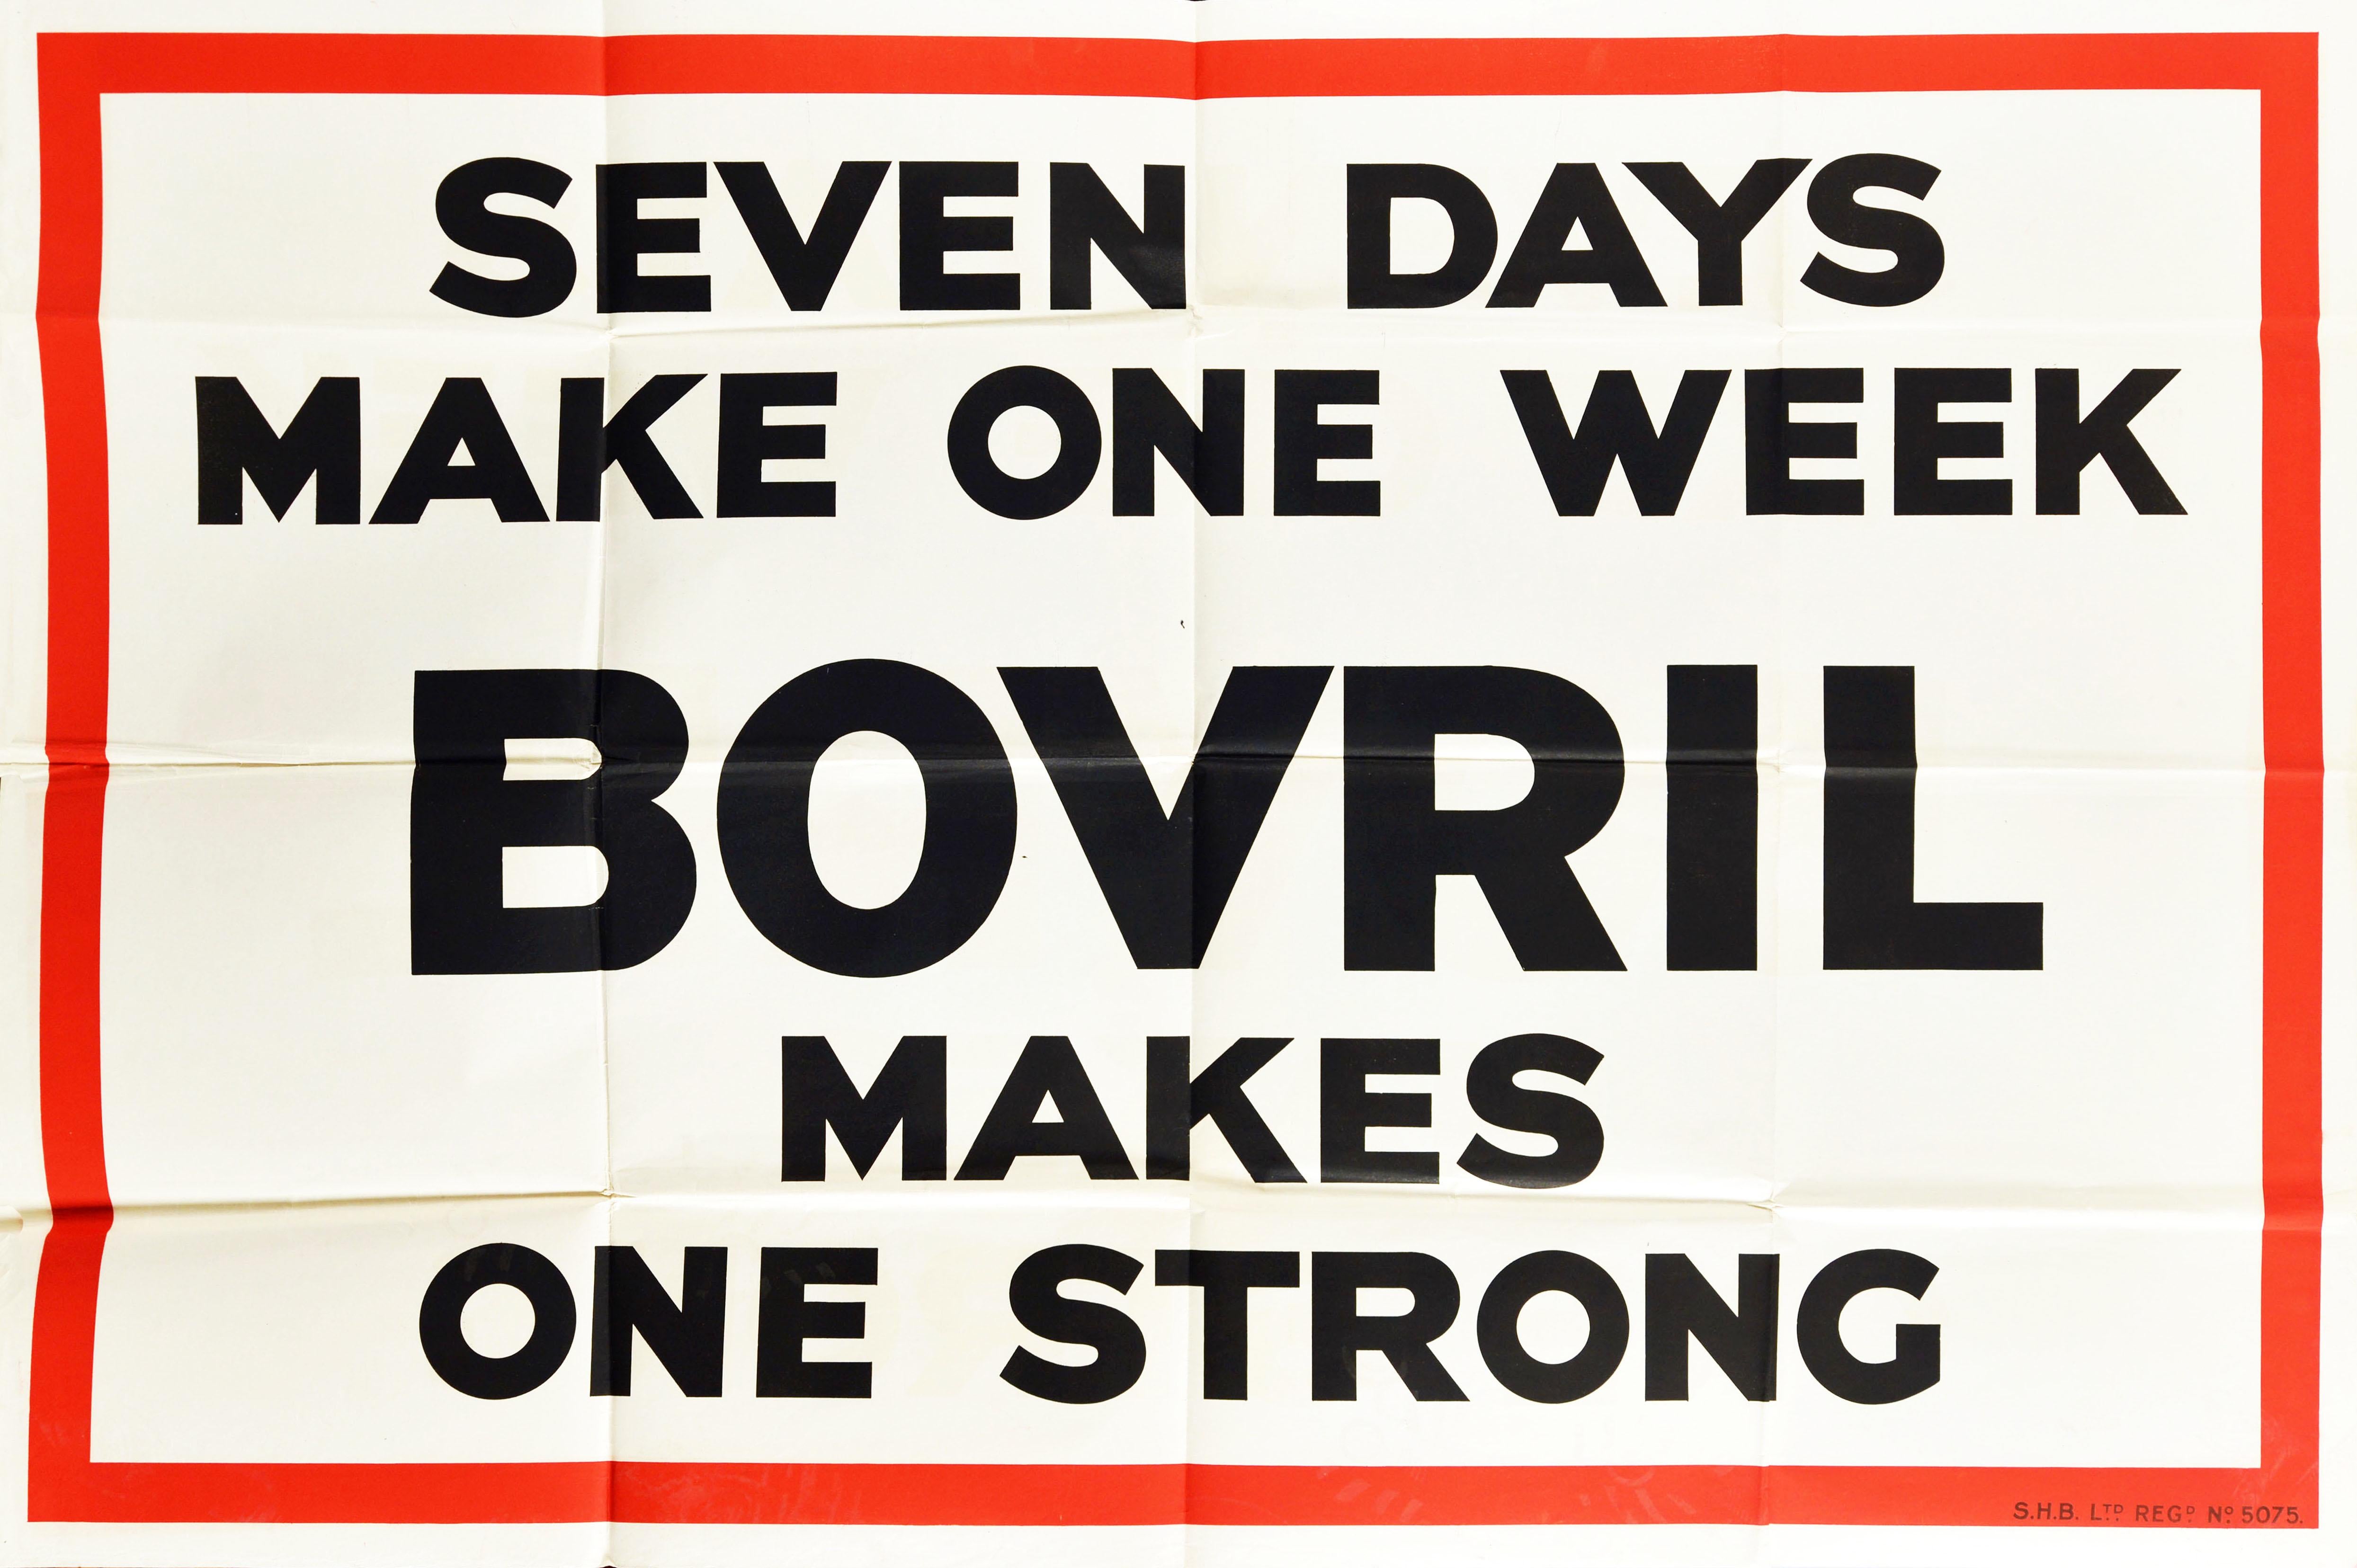 Original vintage food advertising poster for Bovril - Seven days make one week Bovril makes one strong - featuring bold black lettering on a white background in a red frame border. Printed in Britain in the 1930s, this campaign used puns and word